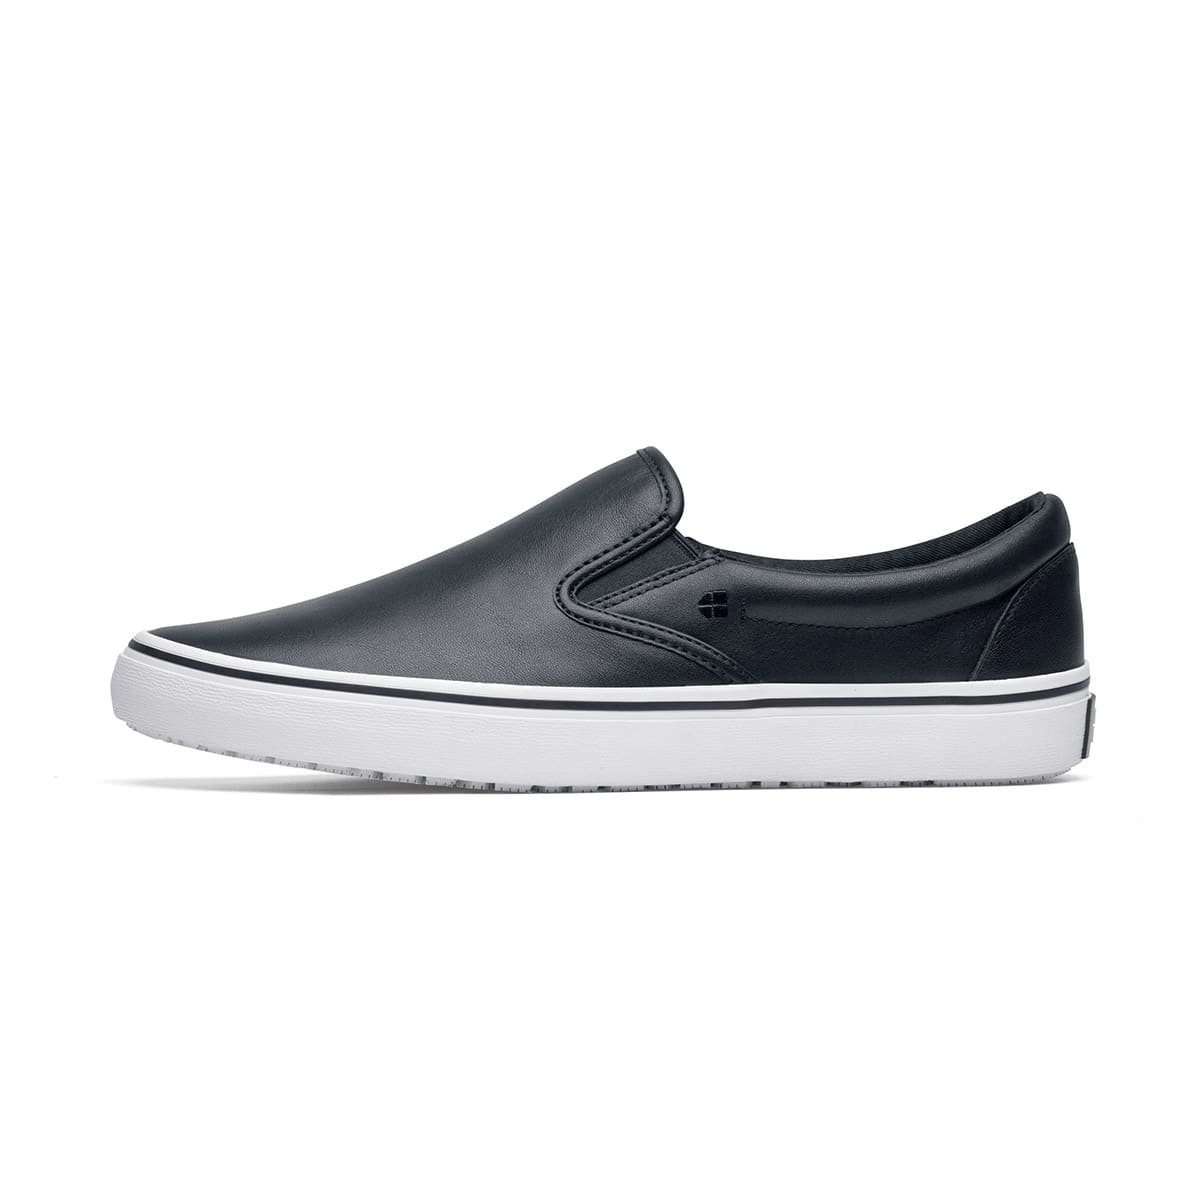 The Merlin Slip On Black and White from Shoes For Crews are slip-on trainers that are slip-resistant, lightweight, easy to clean and water-resistant, seen from the left.